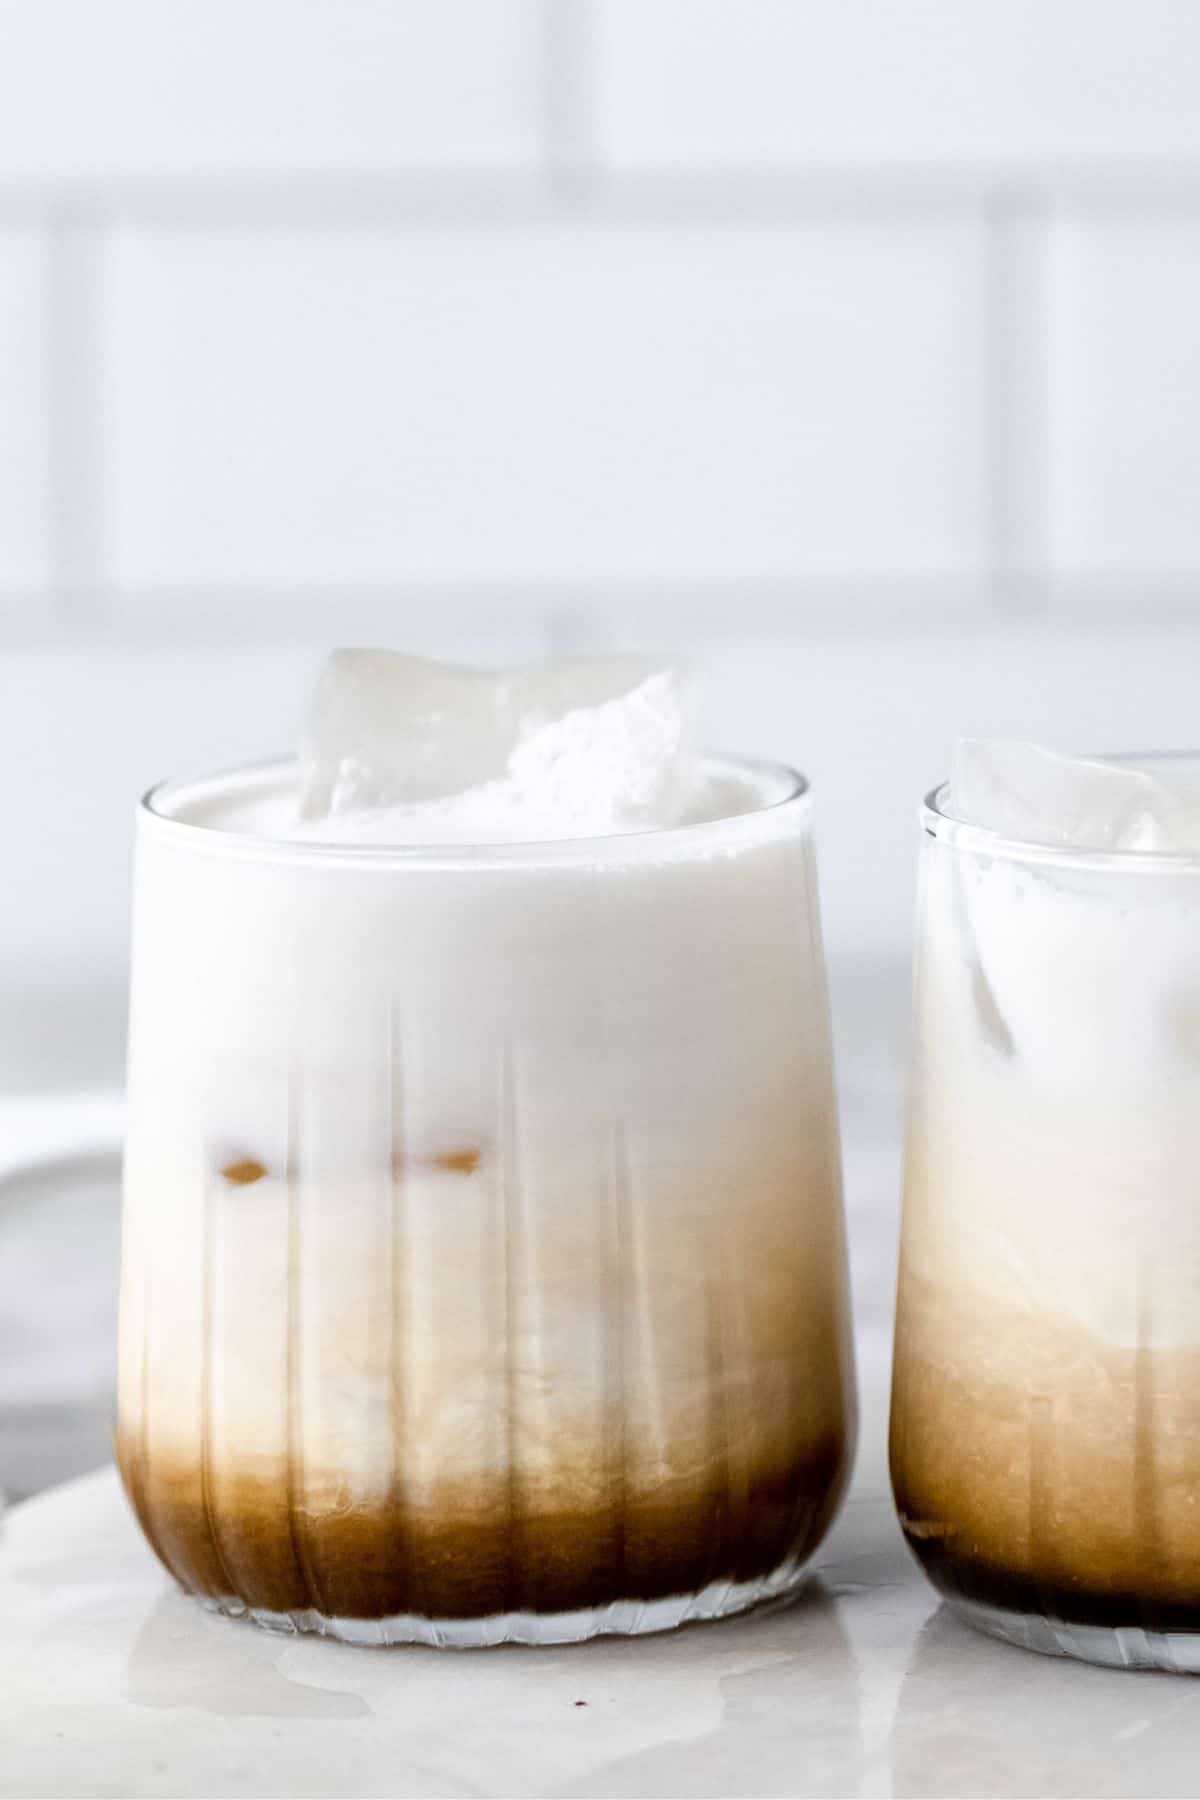 Two white russians in cocktail glasses.